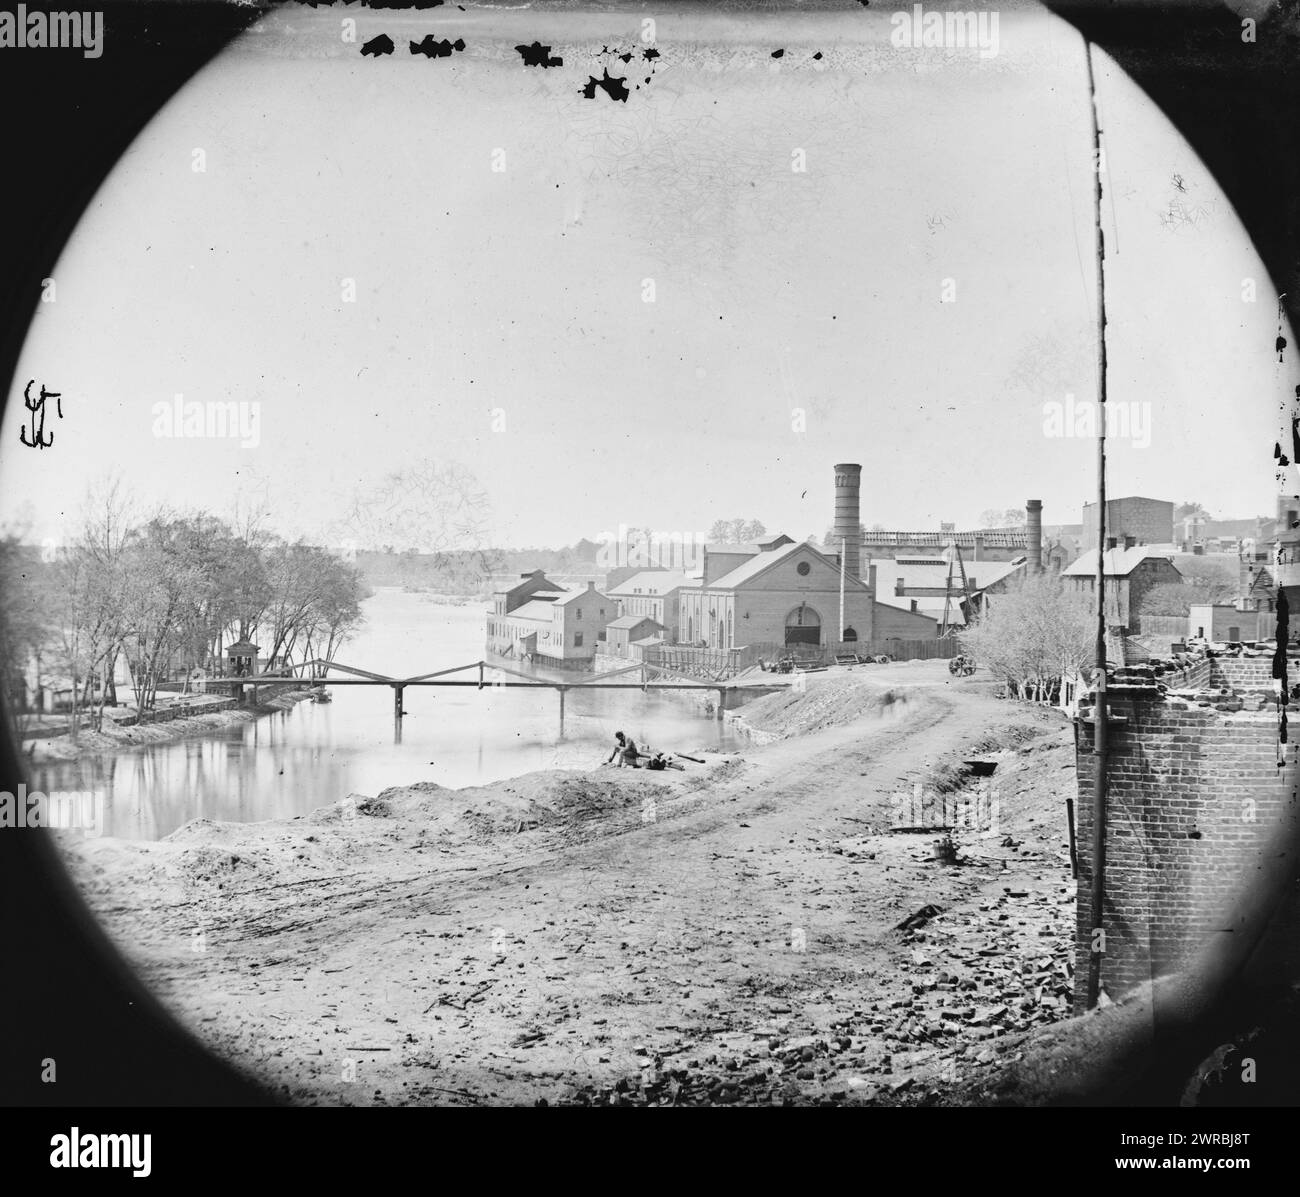 Richmond, Virginia. Tredegar Iron Works, Gardner, Alexander, 1821-1882, photographer, 1865 April., United States, History, Civil War, 1861-1865, Glass negatives, 1860-1870, Stereographs, 1860-1870, 1 negative: glass, stereograph, wet collodion, 4 x 10 in Stock Photo